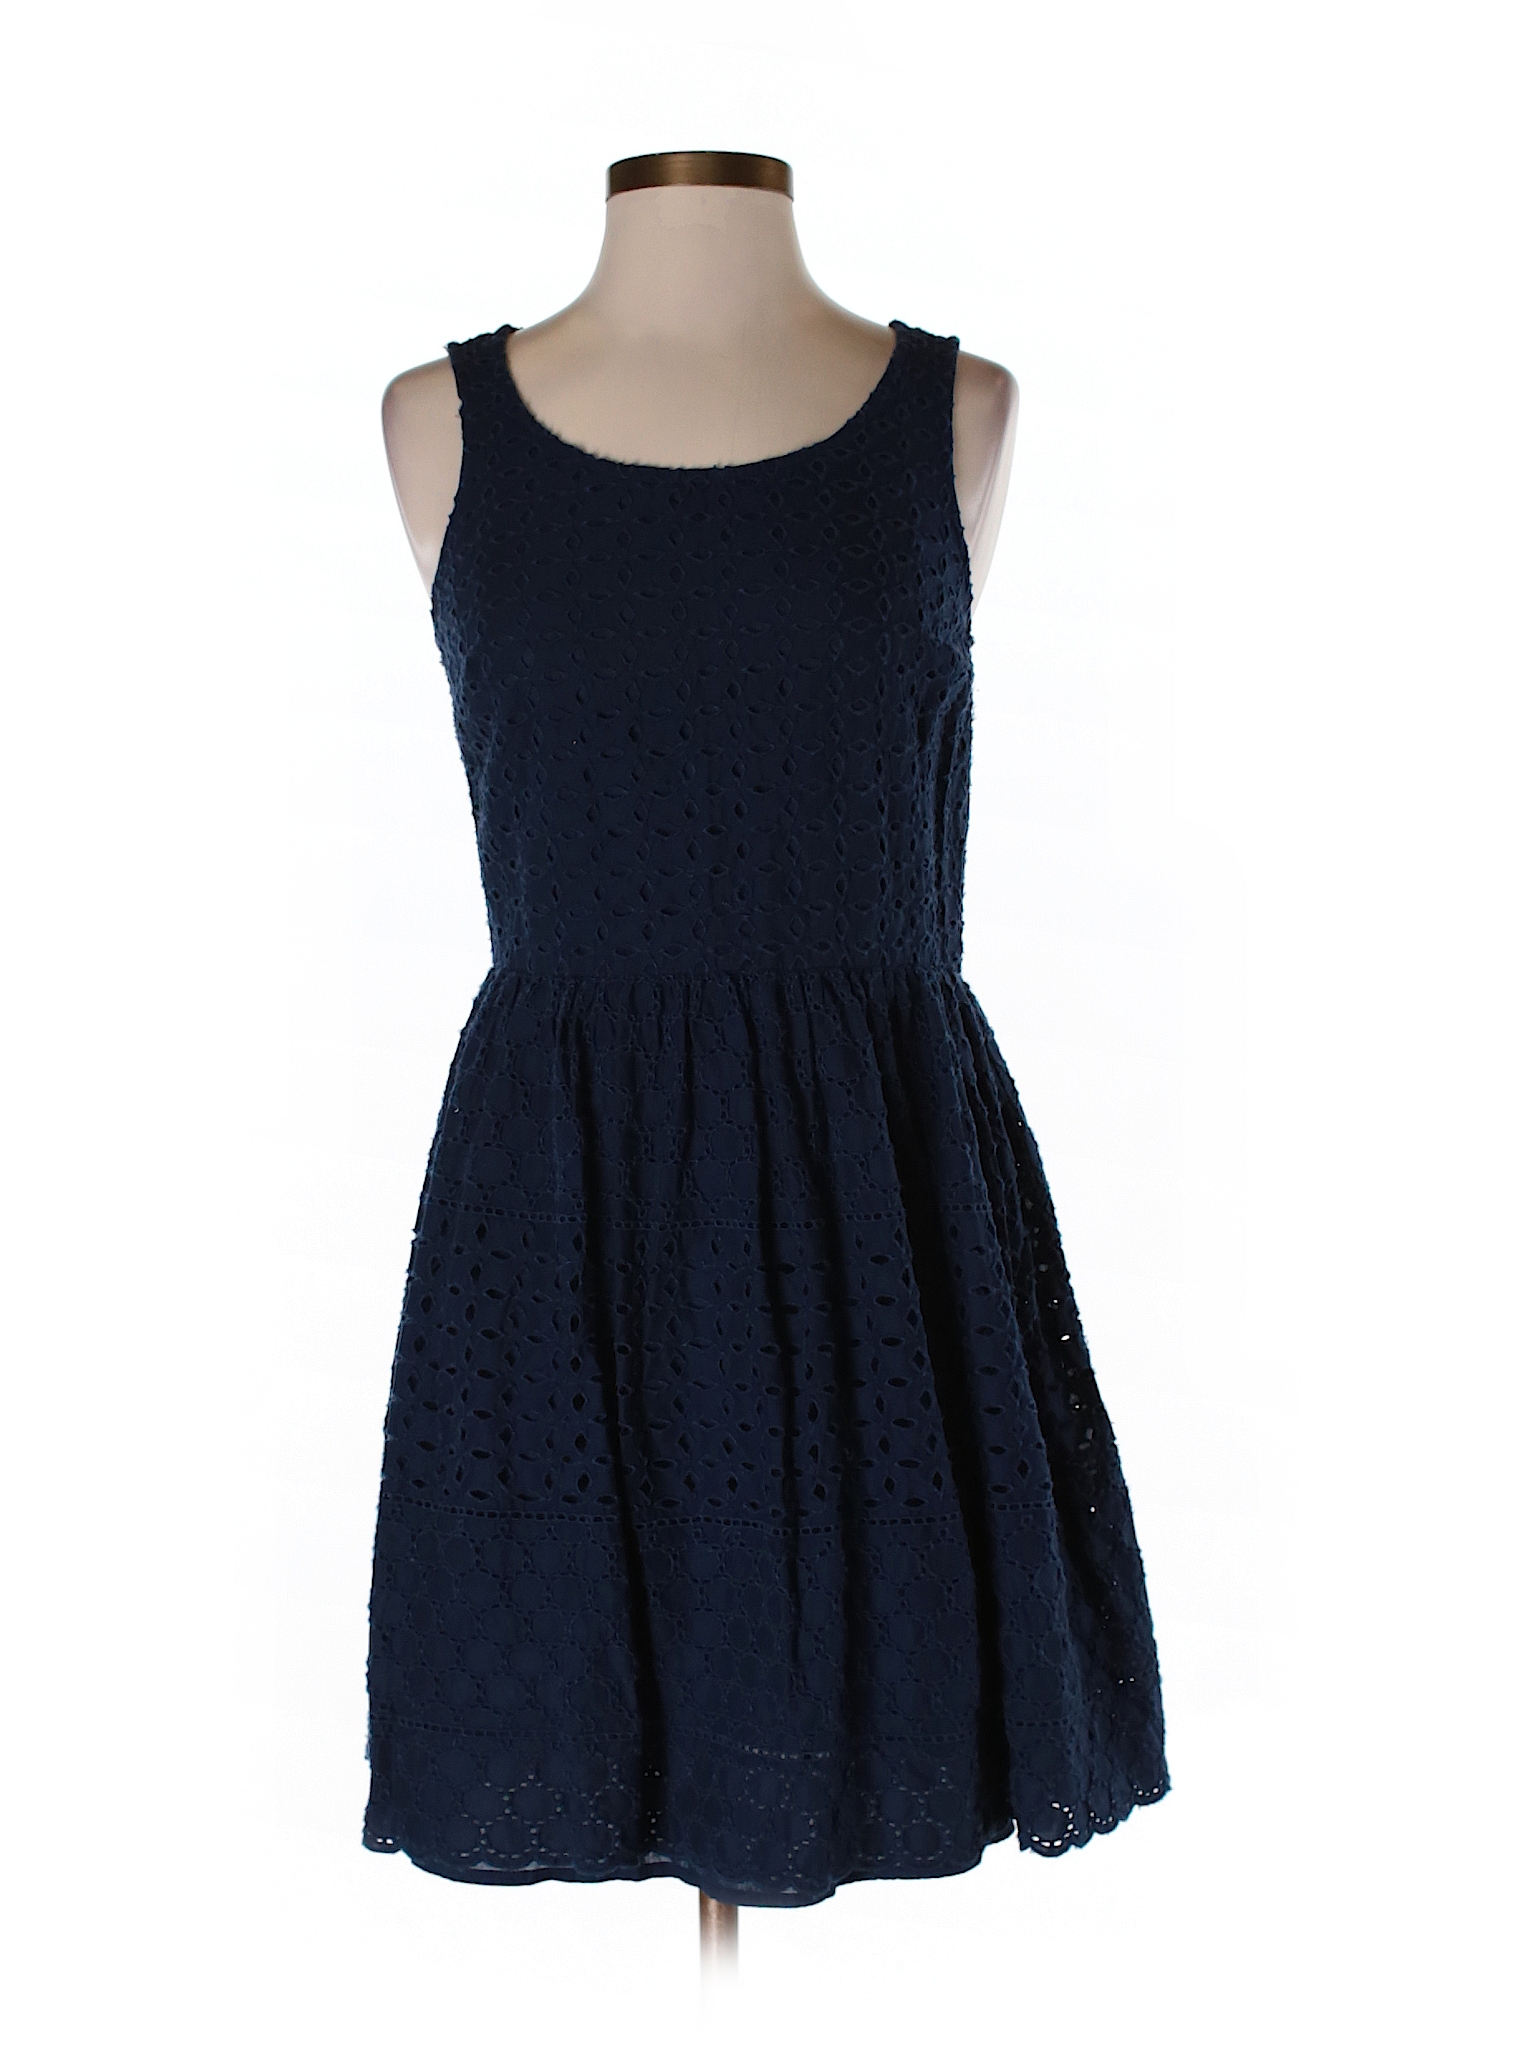 Old Navy 100% Cotton Crochet Navy Blue Casual Dress Size 2 - 70% off ...